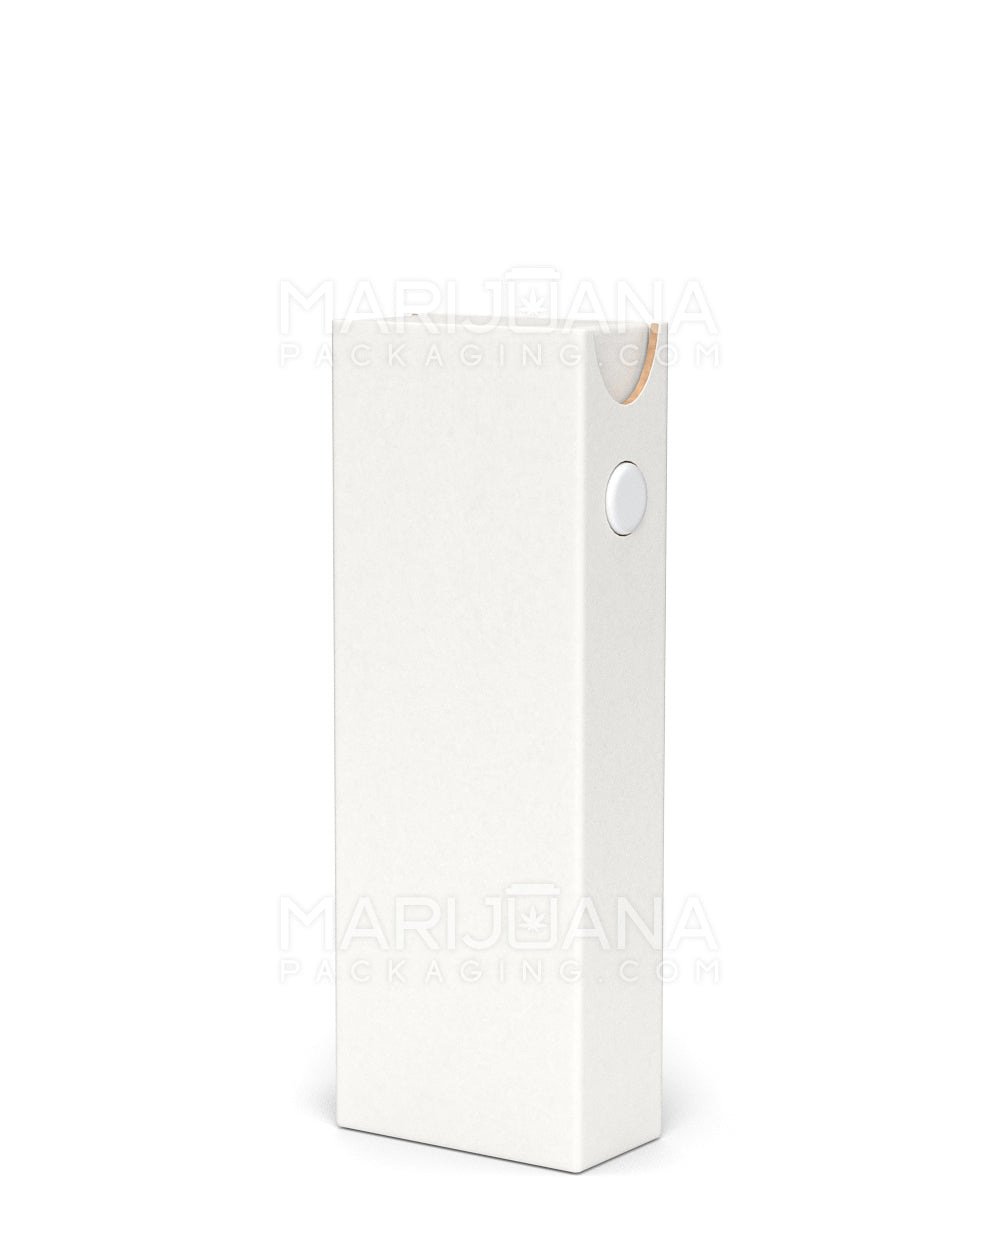 Child Resistant & Sustainable | 100% Recyclable Slim Cardboard Vape Cartridge Box w/ Press Button & Foam Insert | 100mm - White - 100 Count - 4